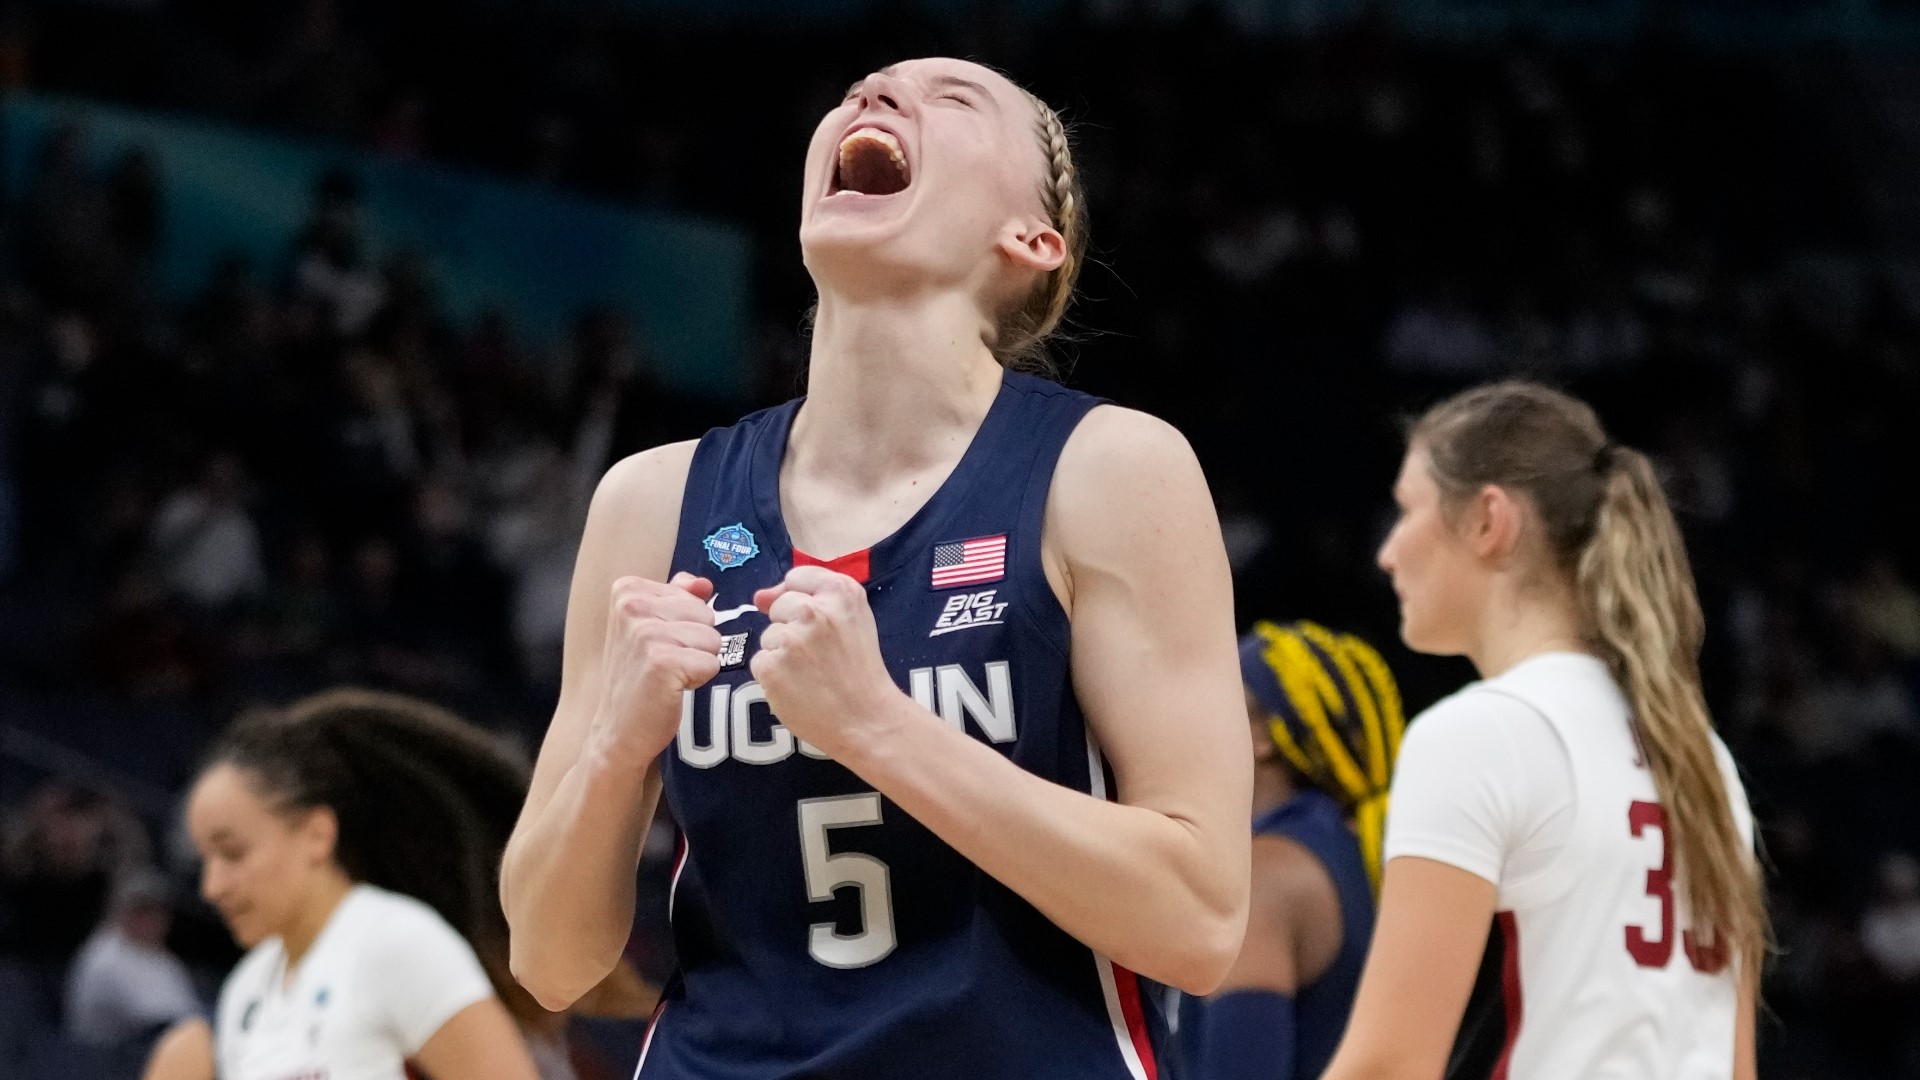 Paige Bueckers scored 14 points and UConn advanced to the national championship game with a 63-58 win over defending champion Stanford on Friday night.